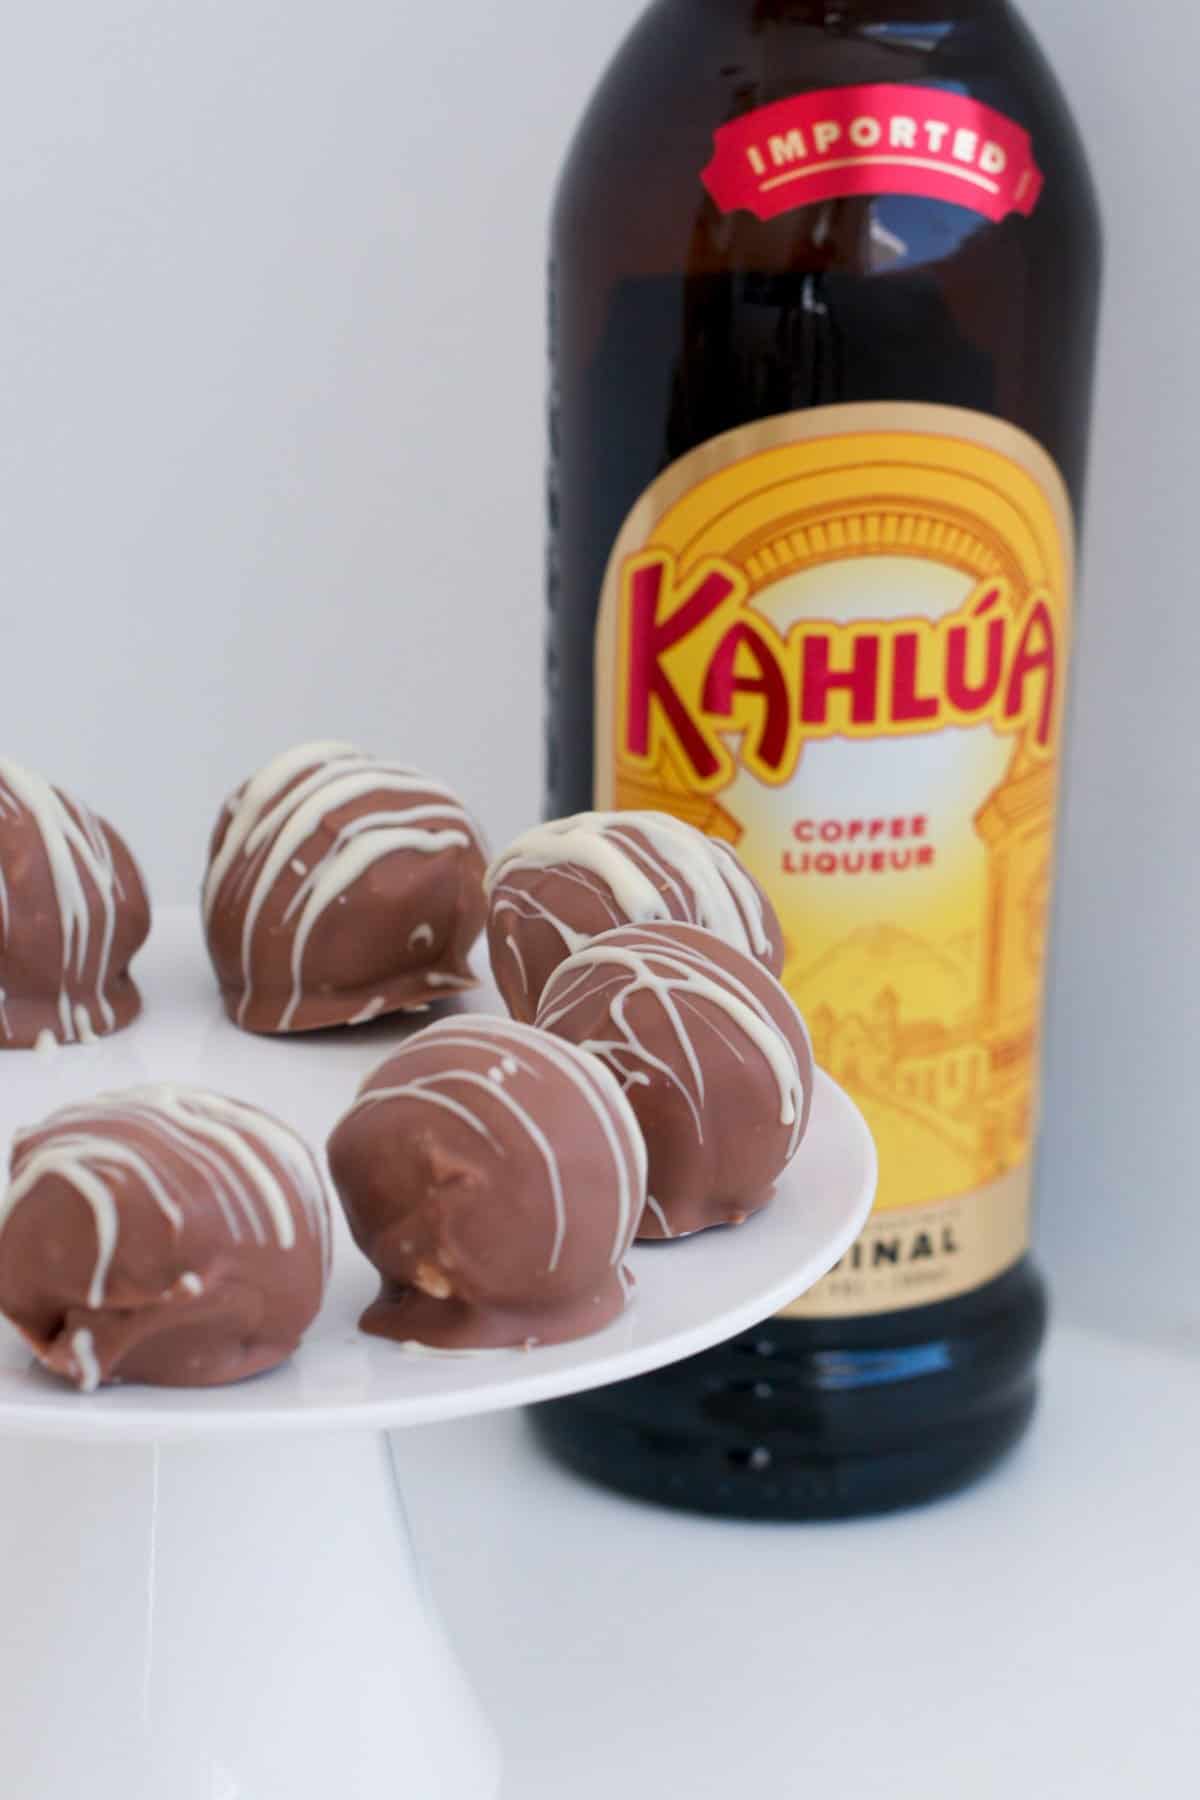 A white cake platter with Cheesecake balls in the foreground and a bottle of kahlua in the background.